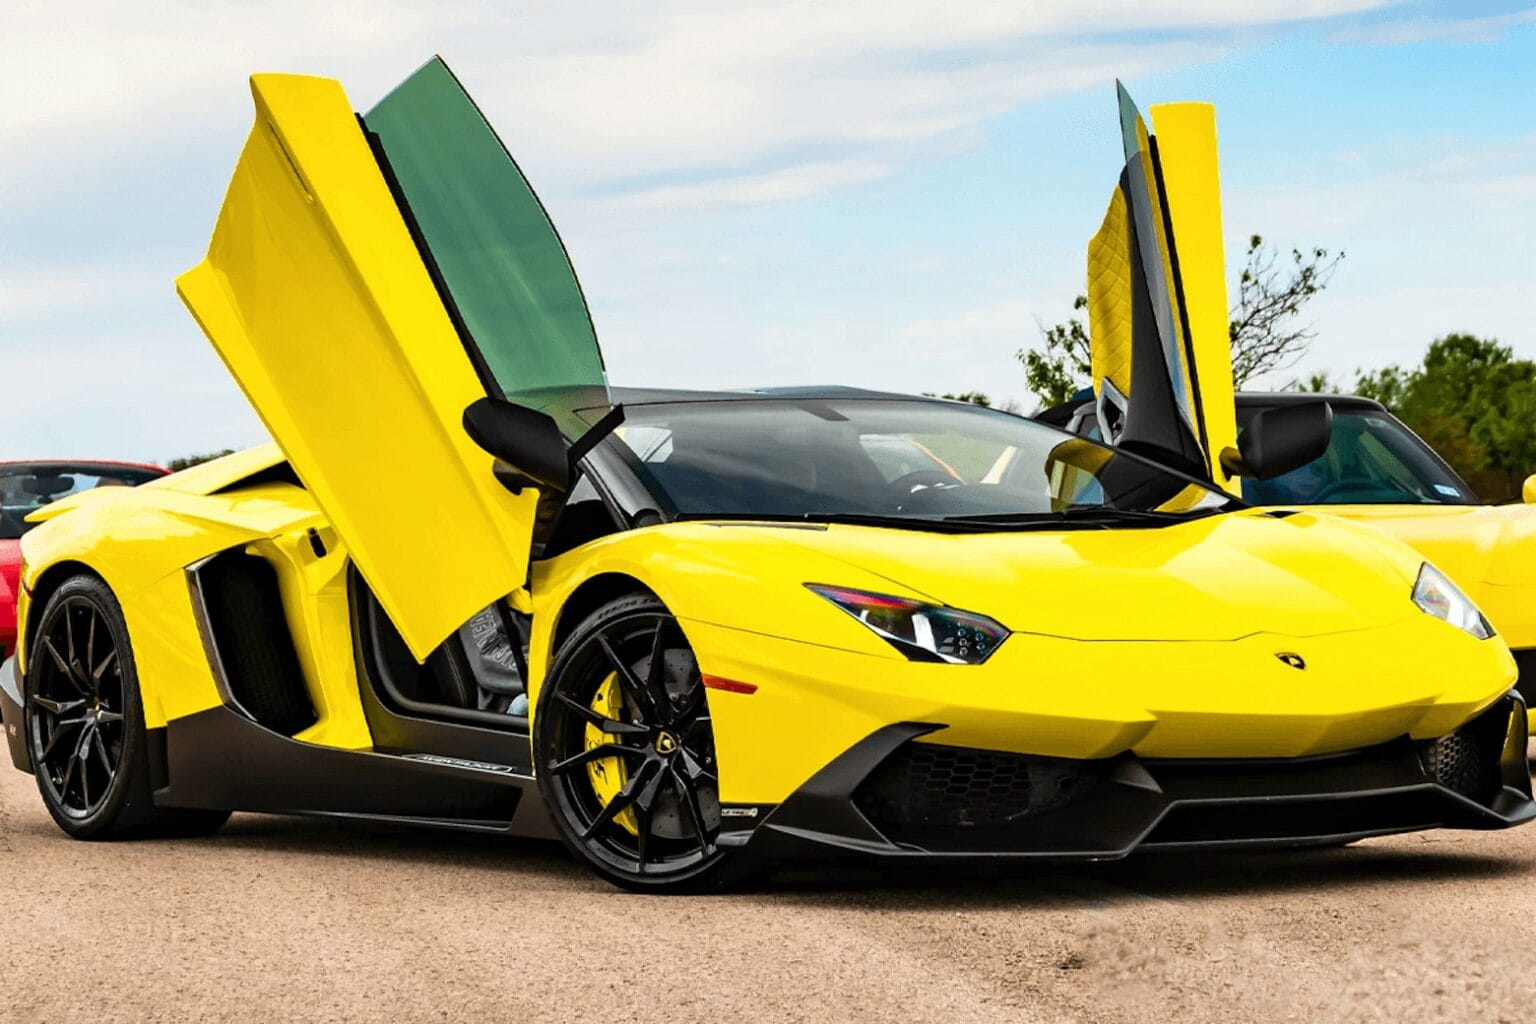 MrBeast + MSCHF gives you the chance to win a Lambo.